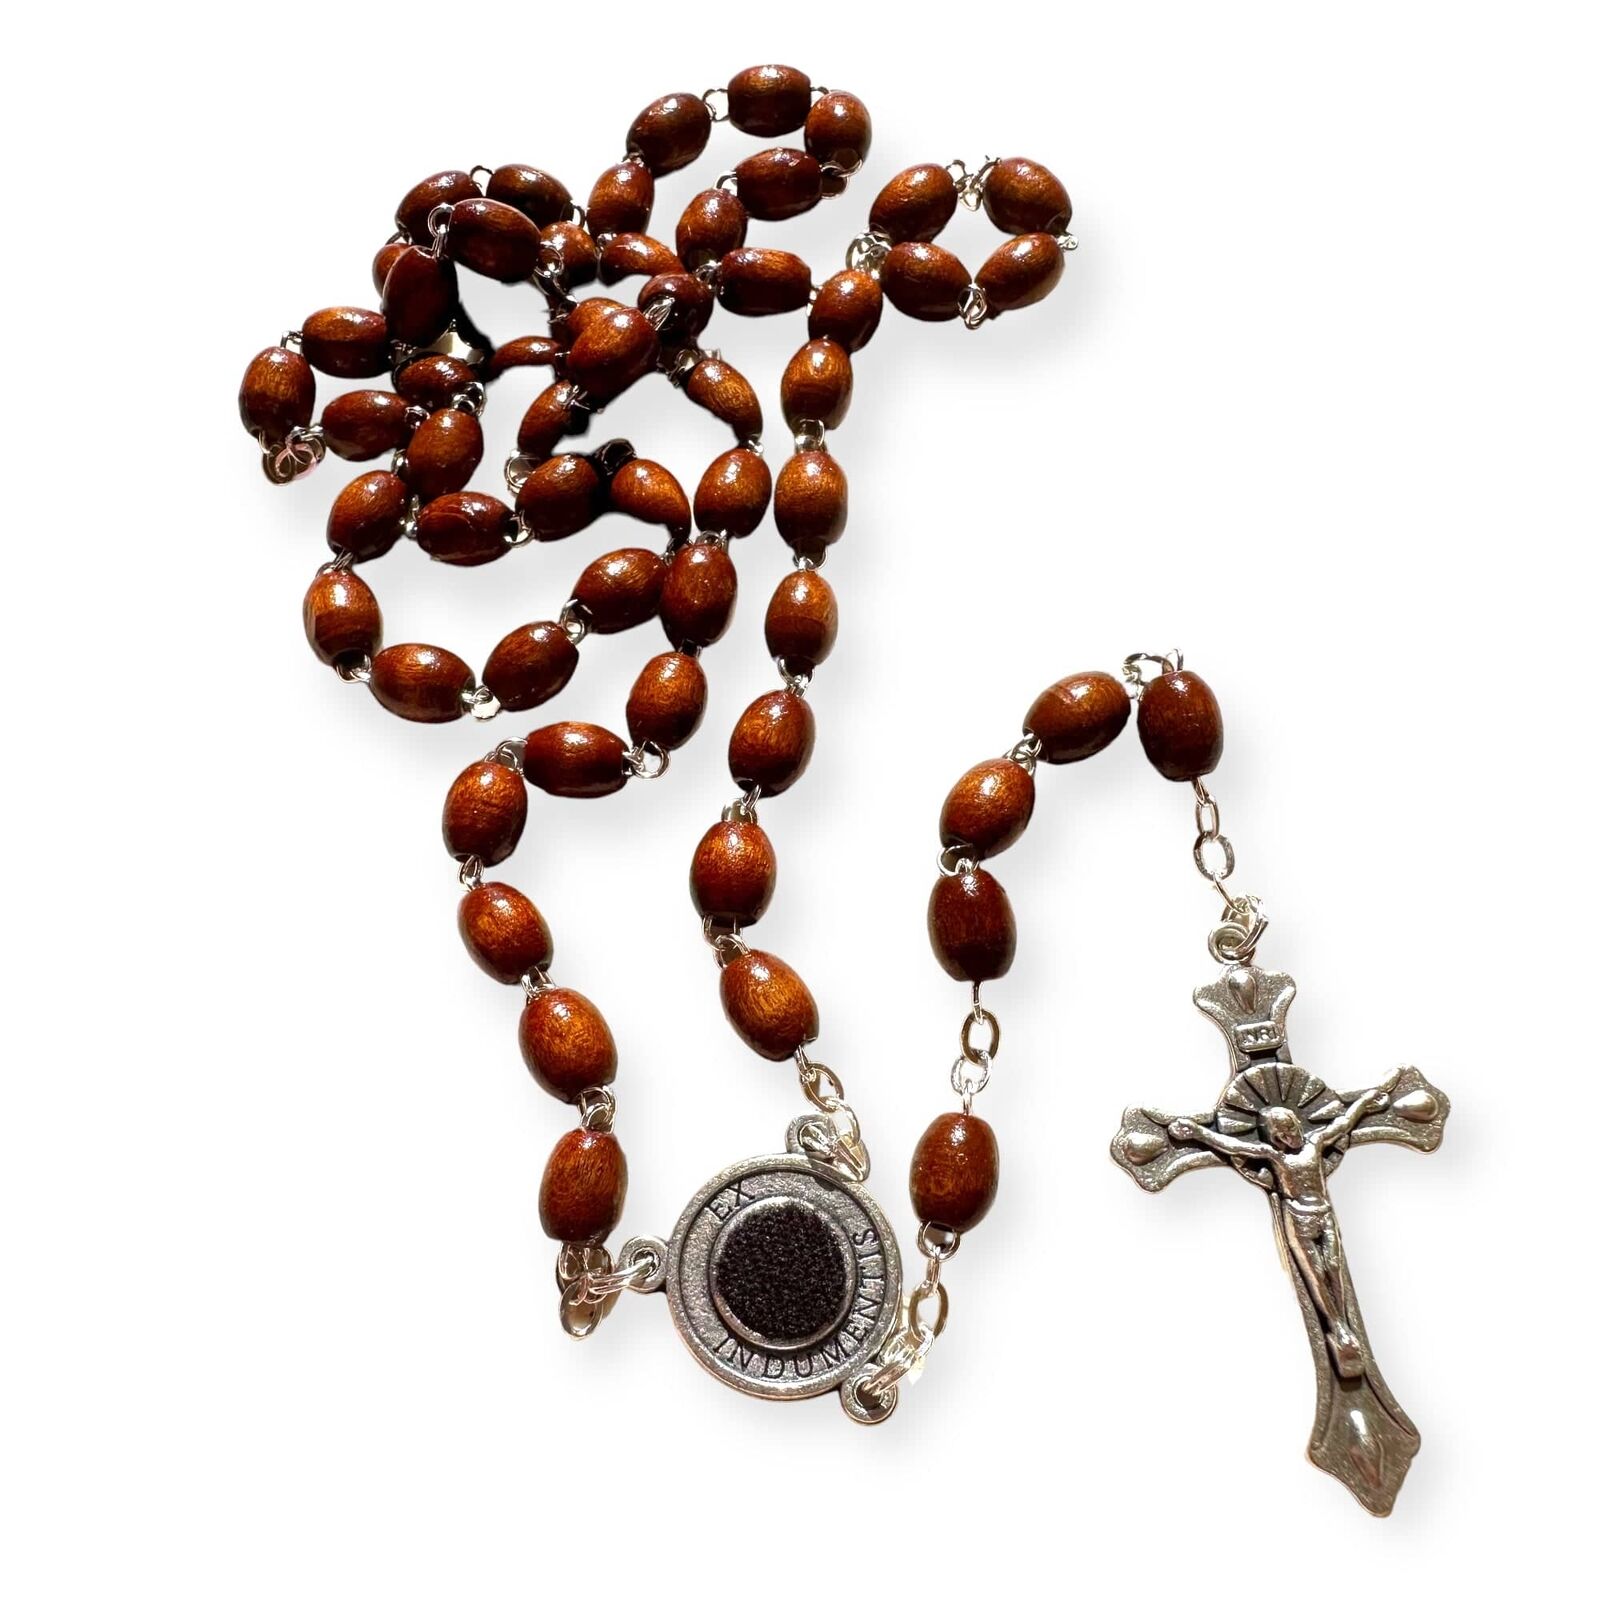 San Padre Pio Rosary Blessed By Pope Benedict 2nd Class Relic -St. Father Pio